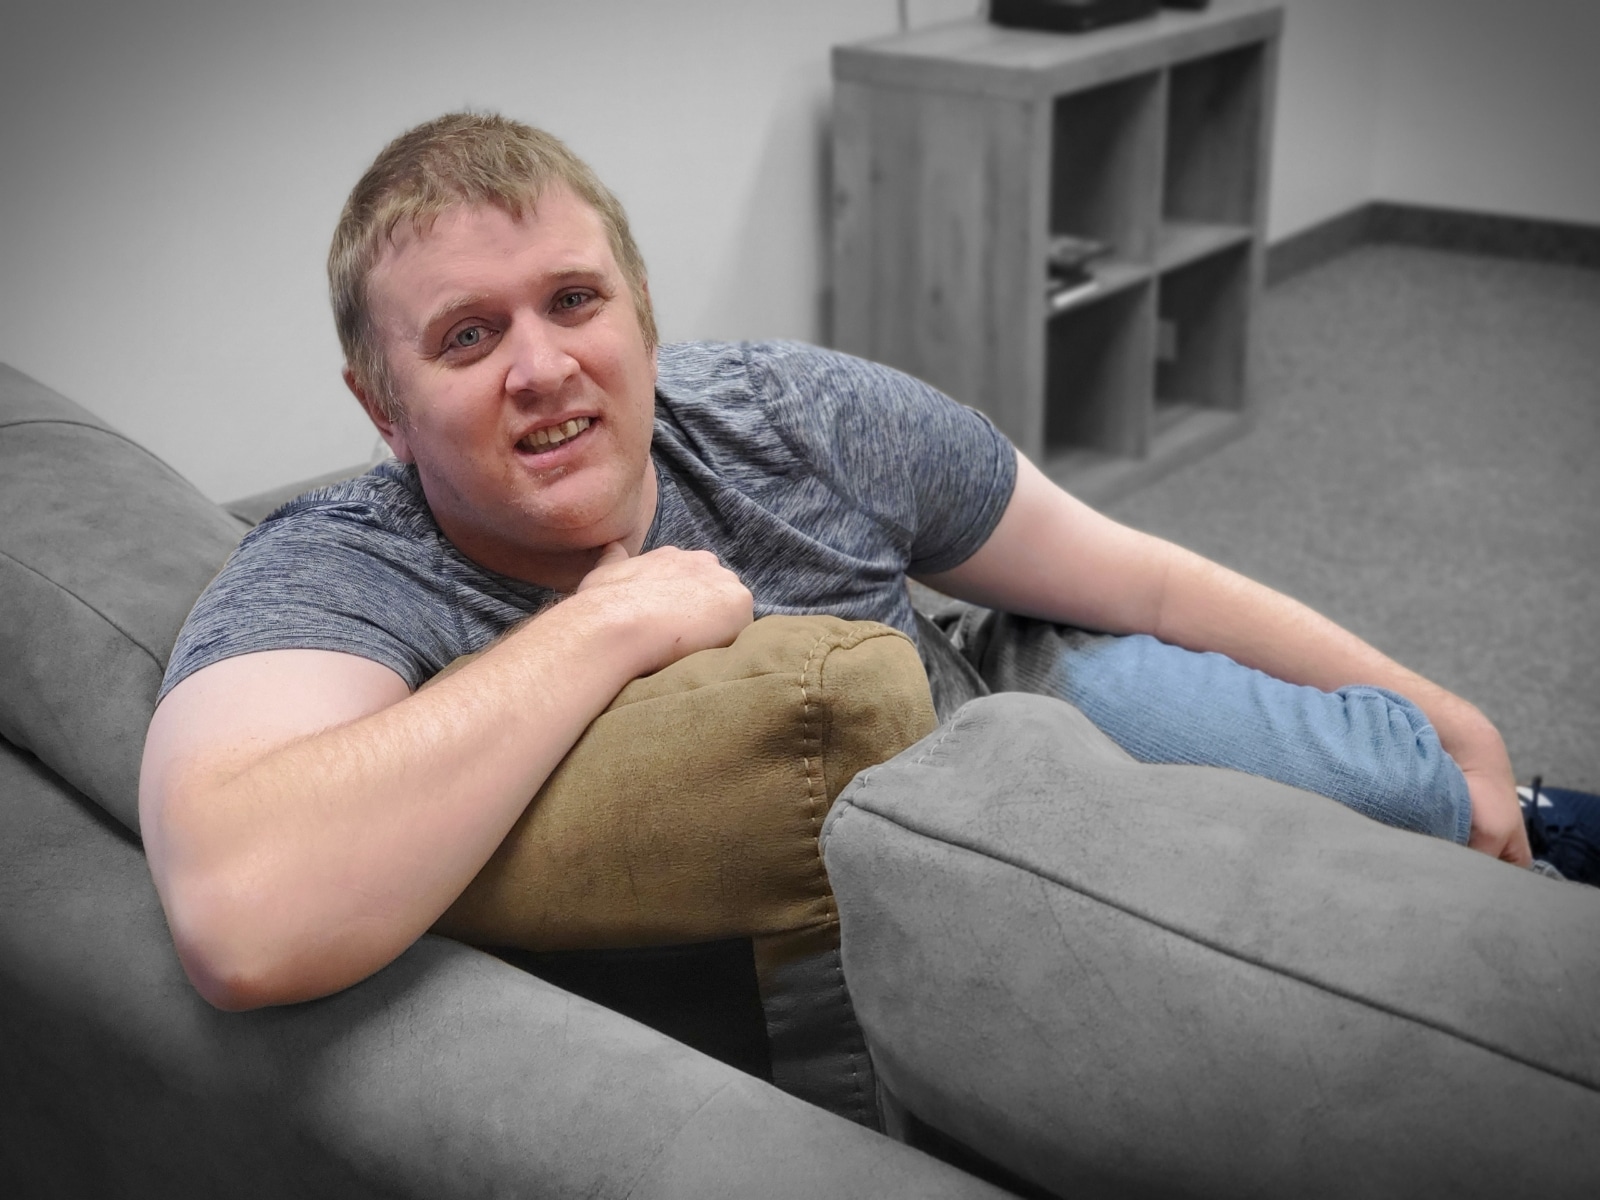 Ryan sitting on a comfy couch